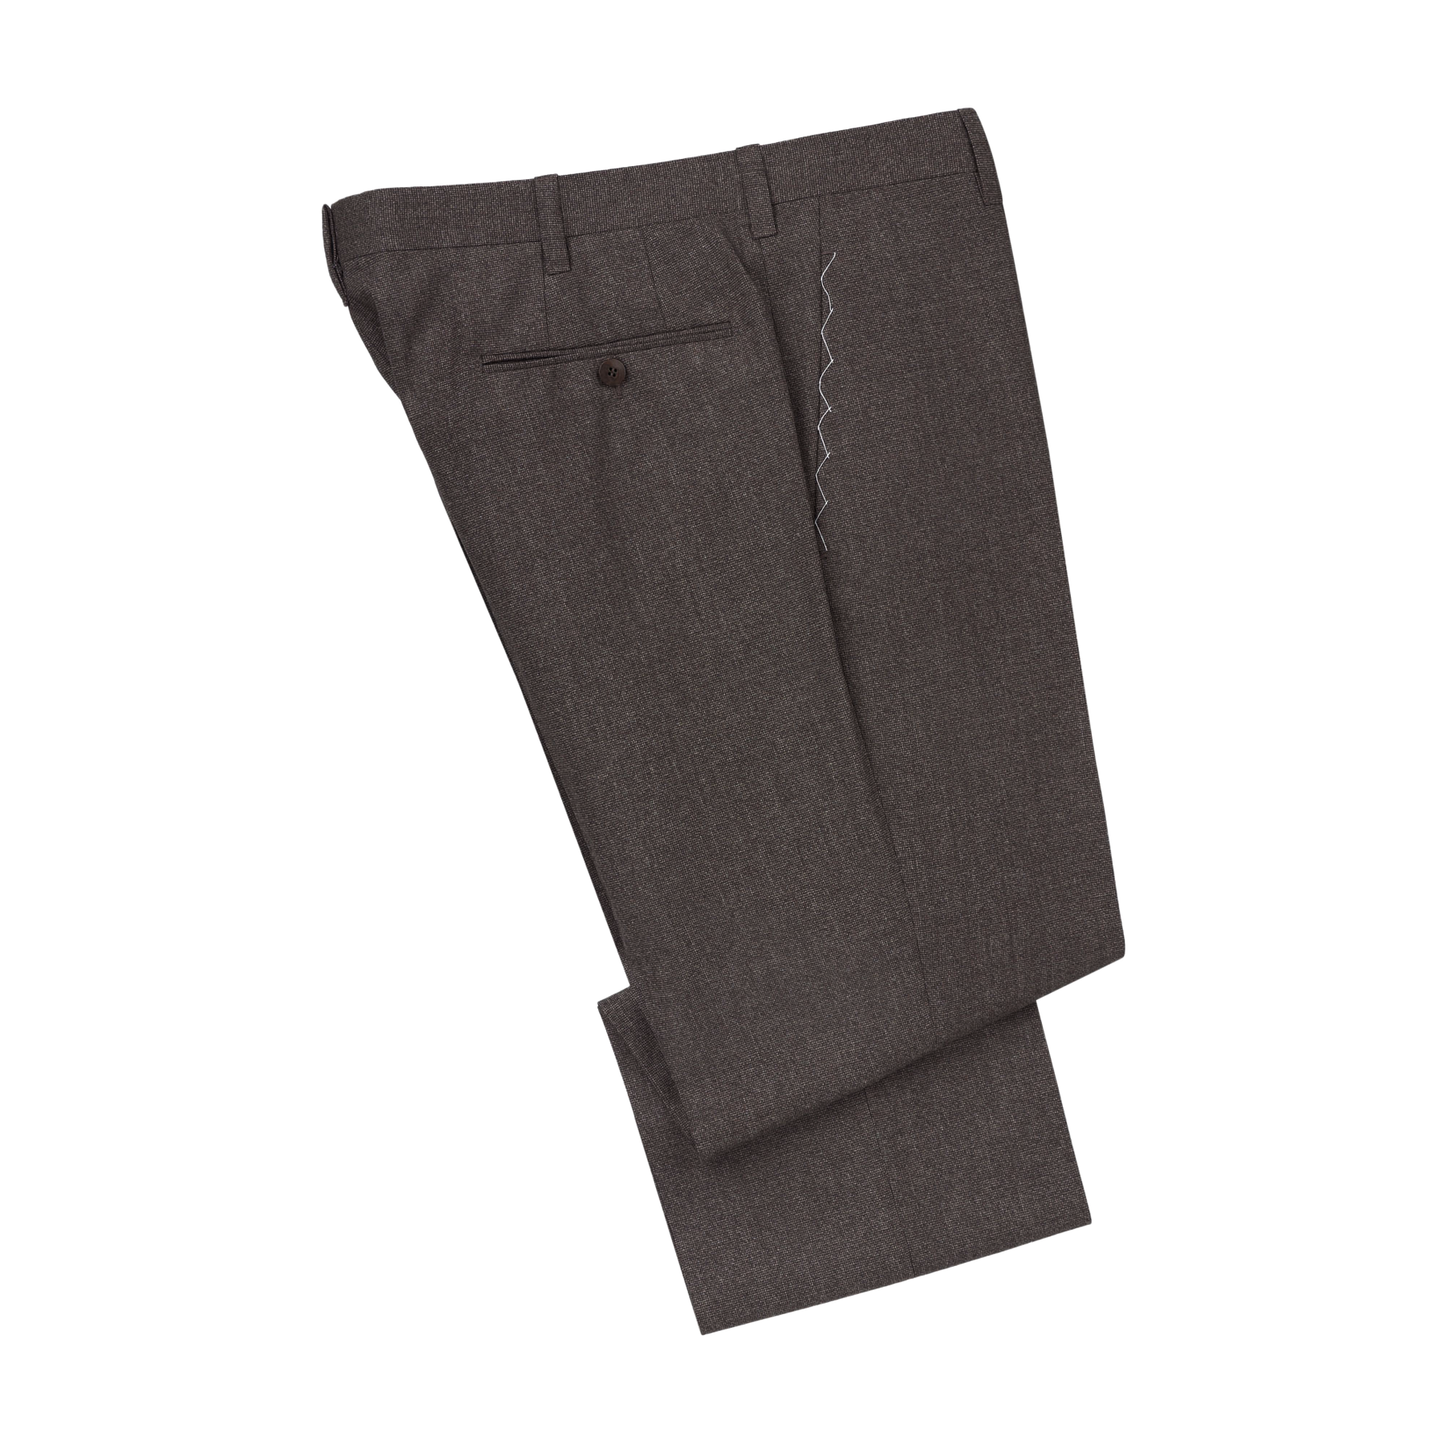 Cesare Attolini Single-Breasted Wool and Cashmere-Blend Suit in Brown - SARTALE